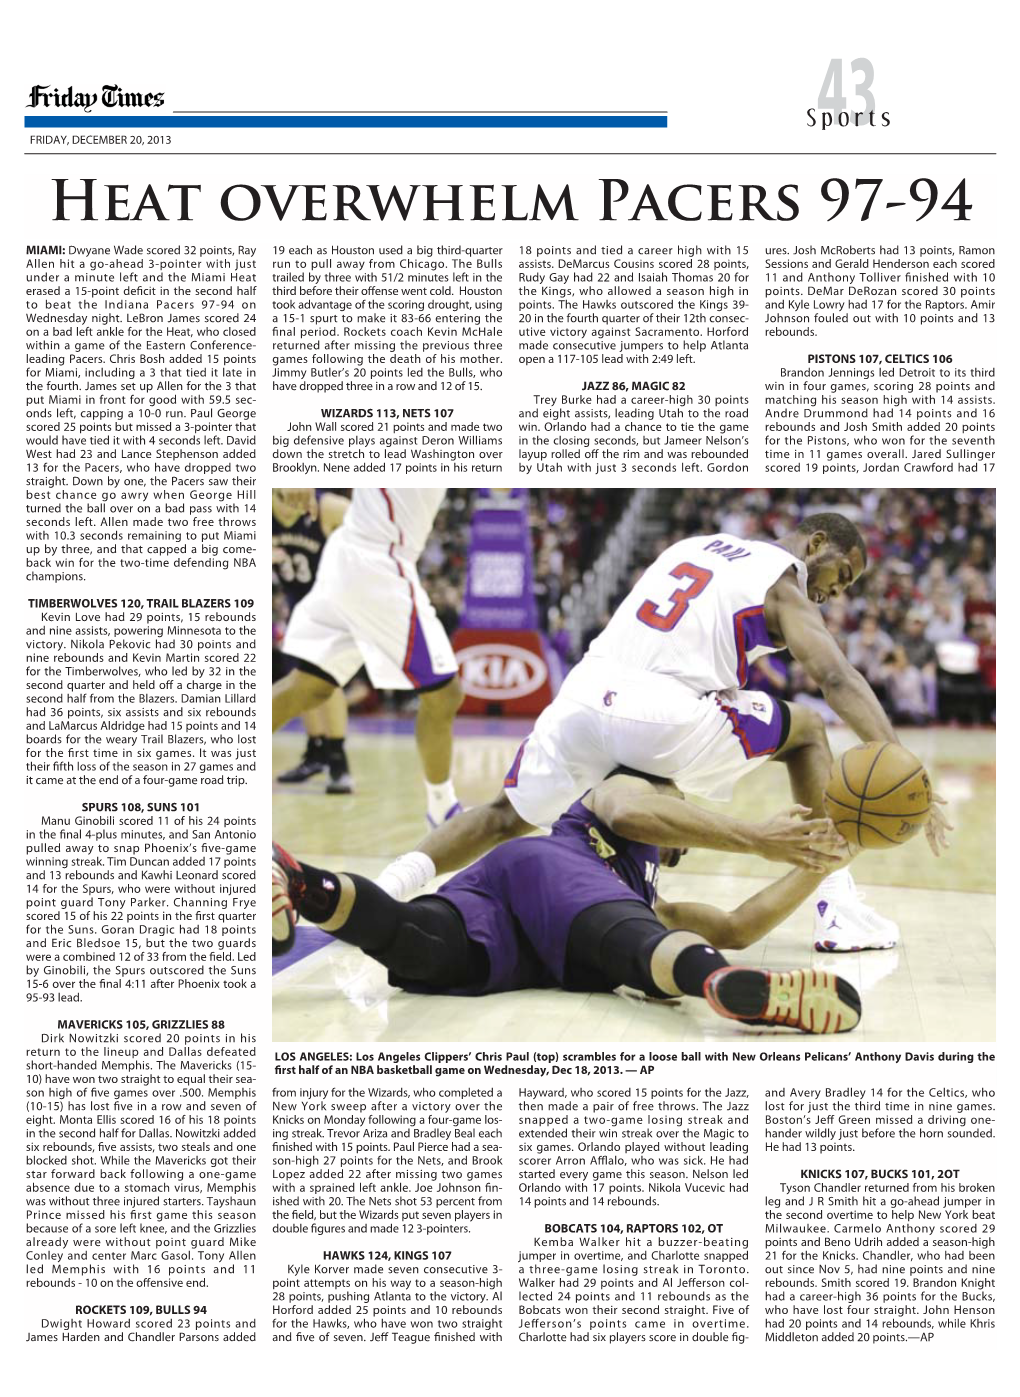 Heat Overwhelm Pacers 97-94